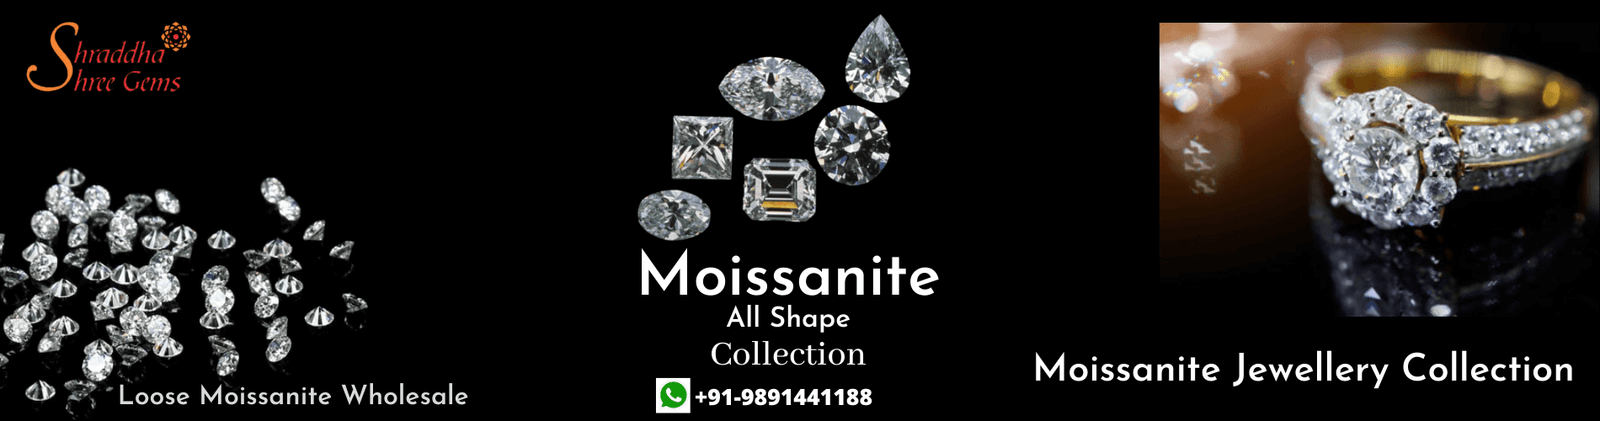 Moissanite Jewellery Collection Banner